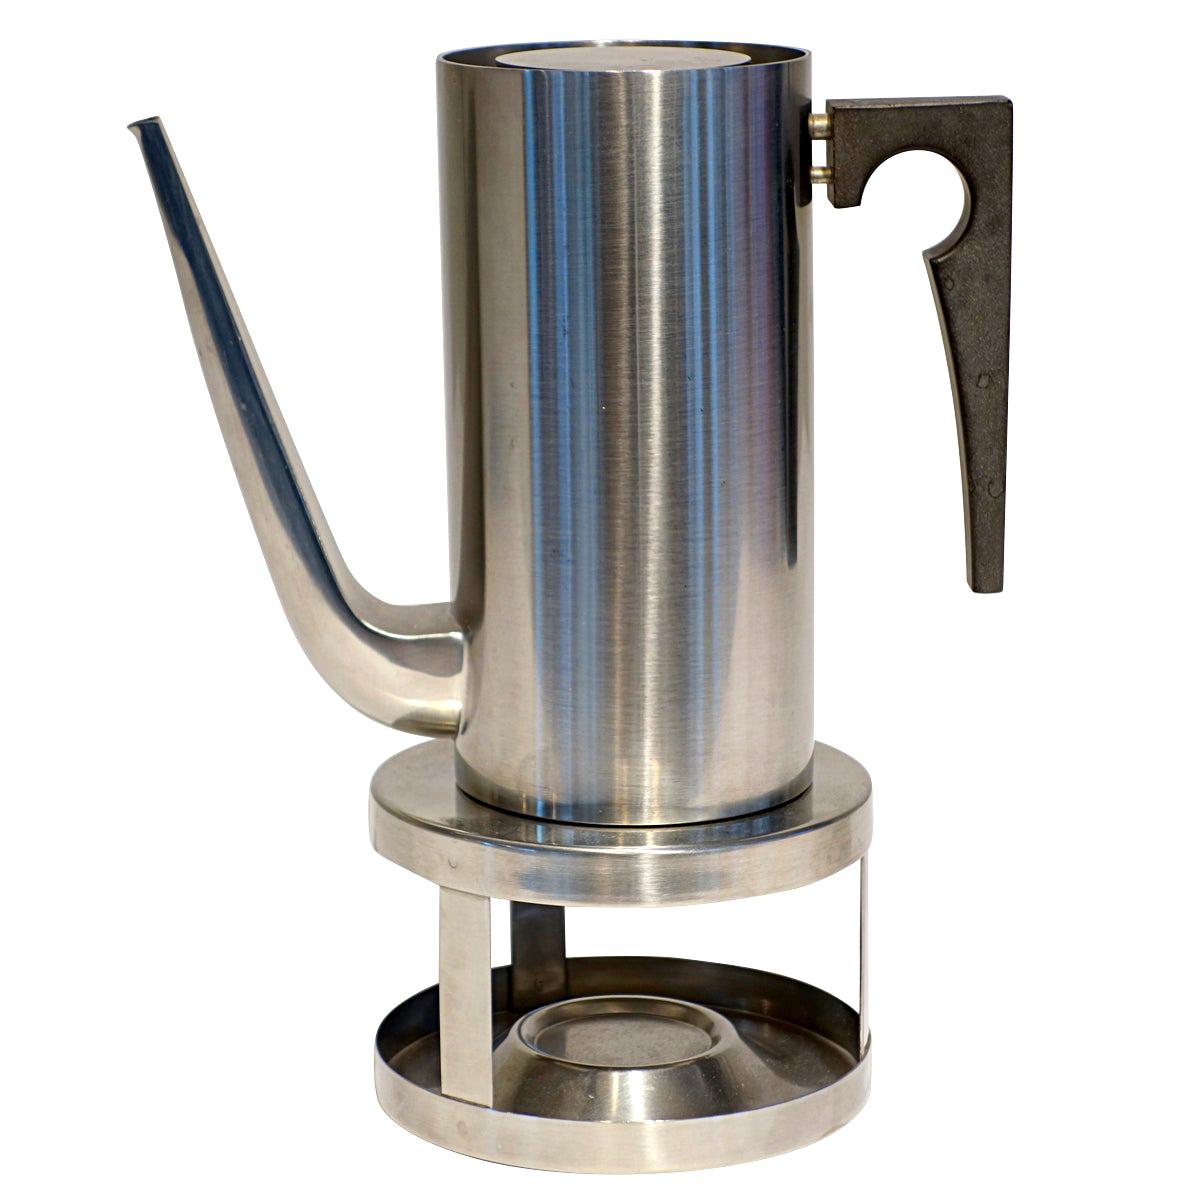 Midcentury Cylinda Coffee Pot and Stove by Arne Jacobsen for Stelton